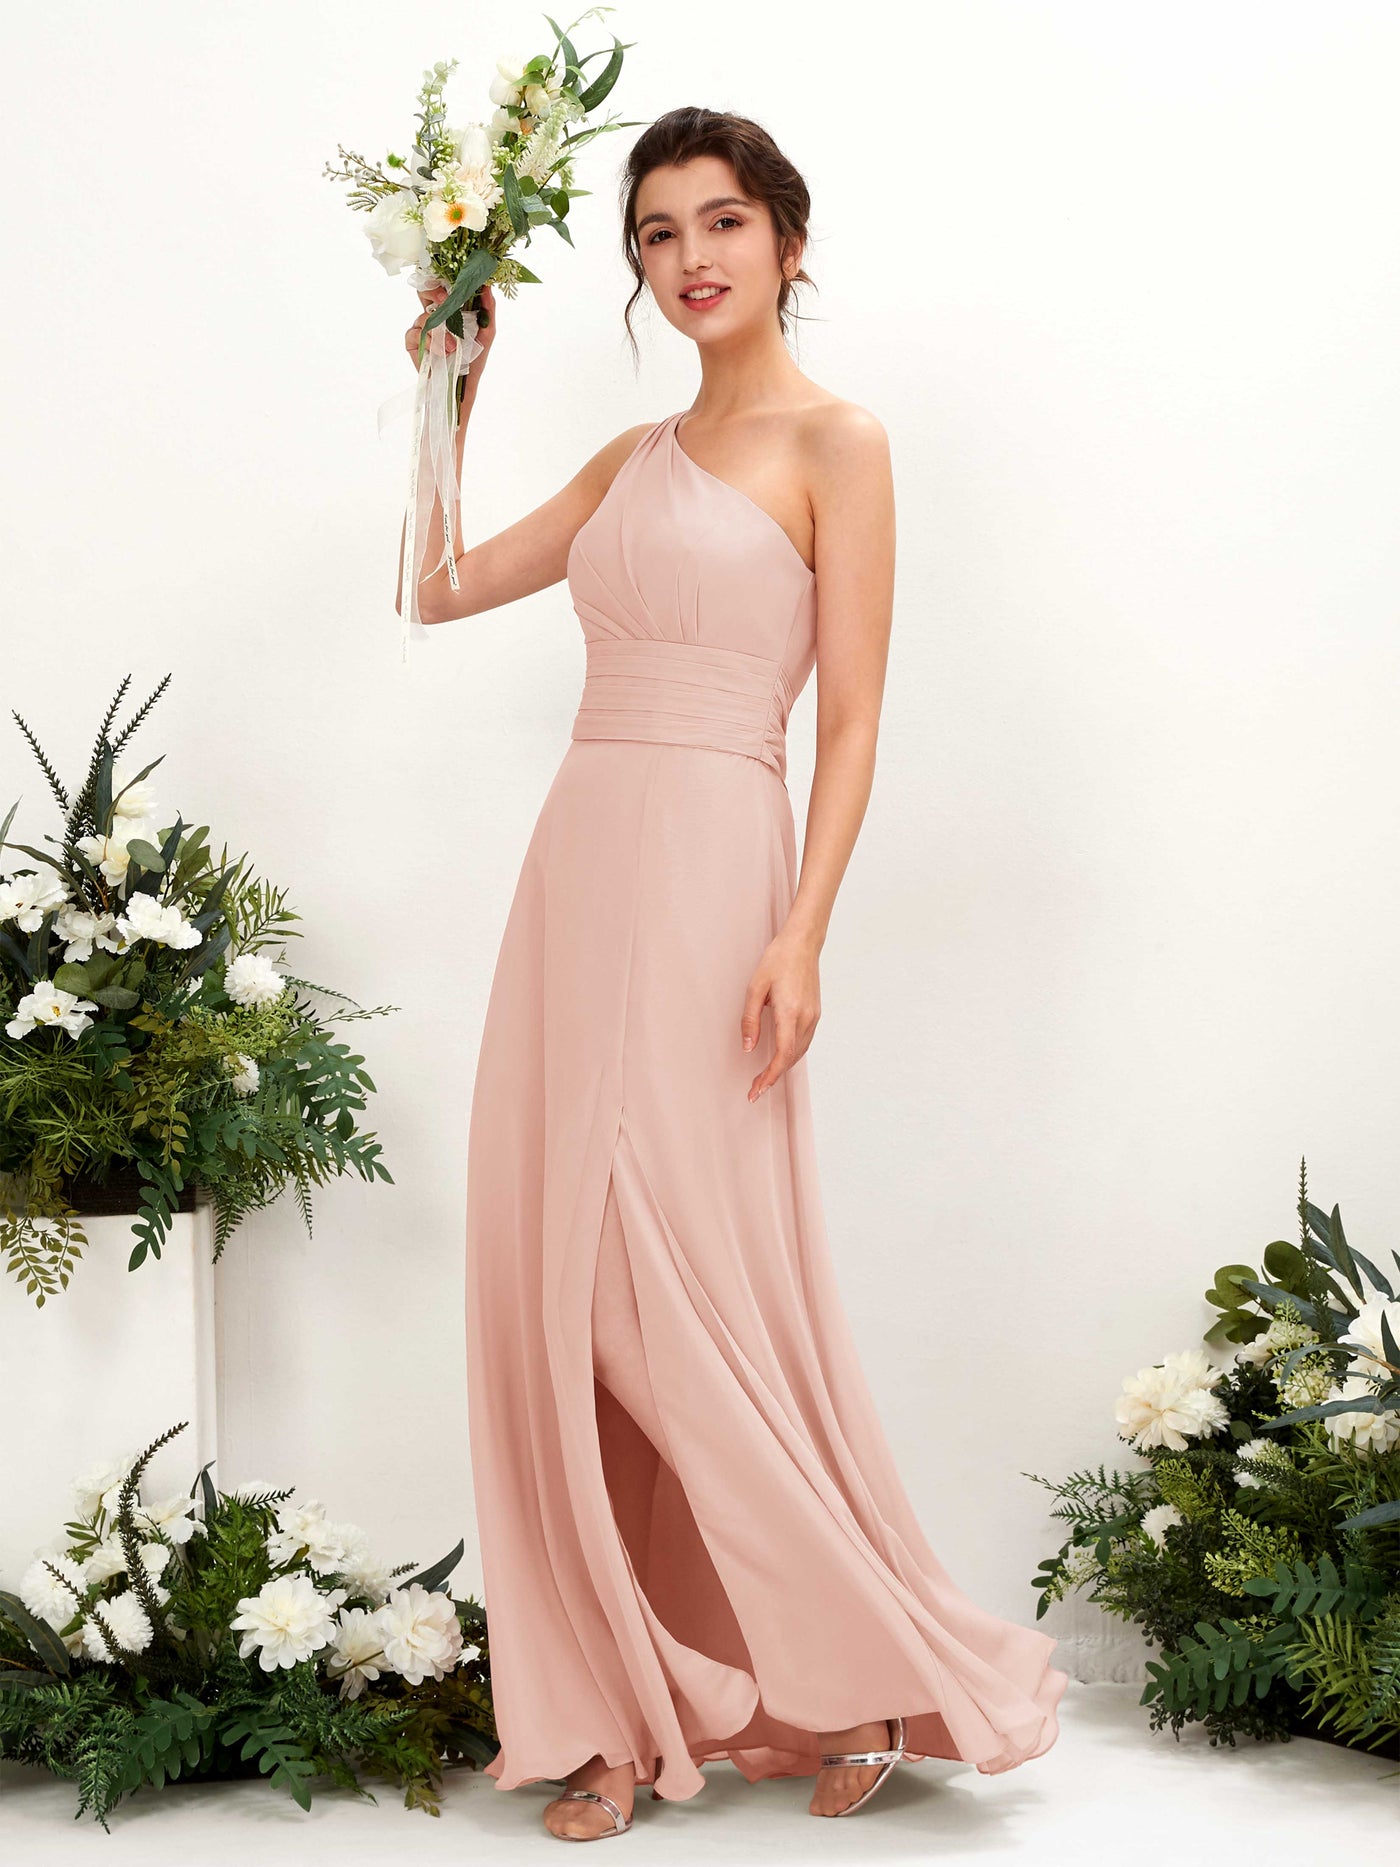 Pearl Pink Bridesmaid Dresses Bridesmaid Dress A-line Chiffon One Shoulder Full Length Sleeveless Wedding Party Dress (81224708)#color_pearl-pink